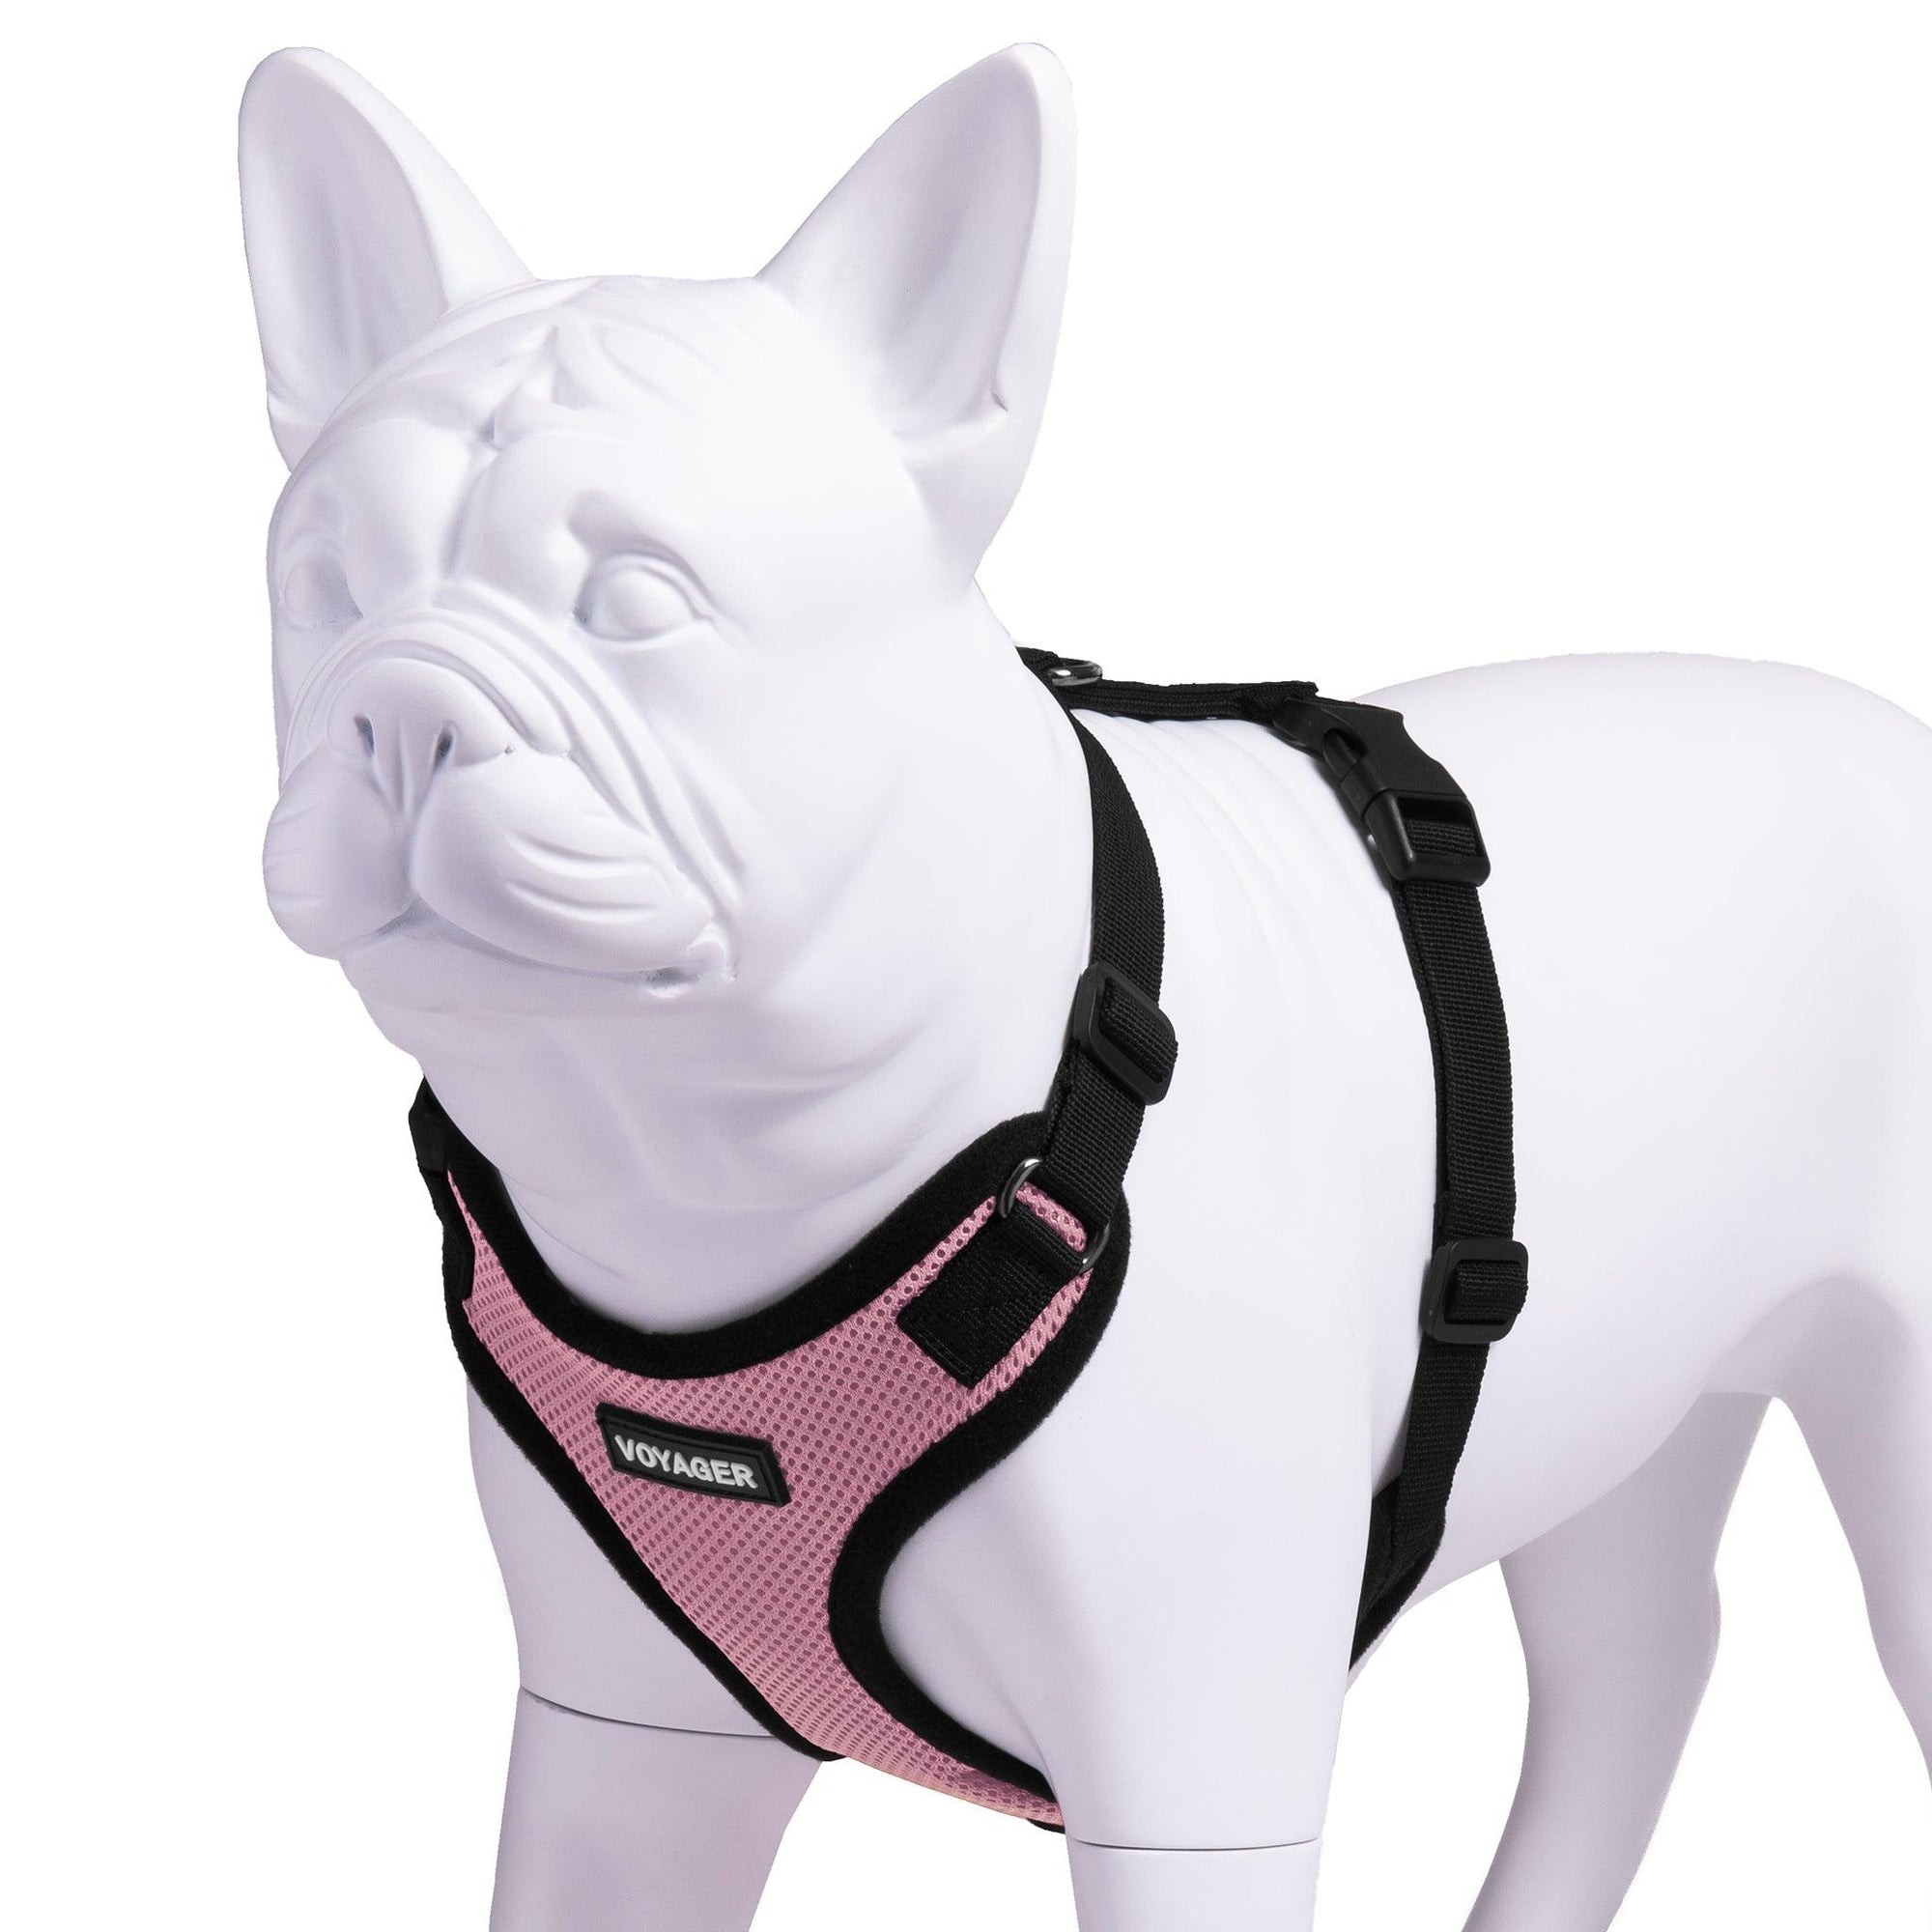 VOYAGER Step-In Lock Dog Harness in Pink with Black Trim and Webbing - Expanded